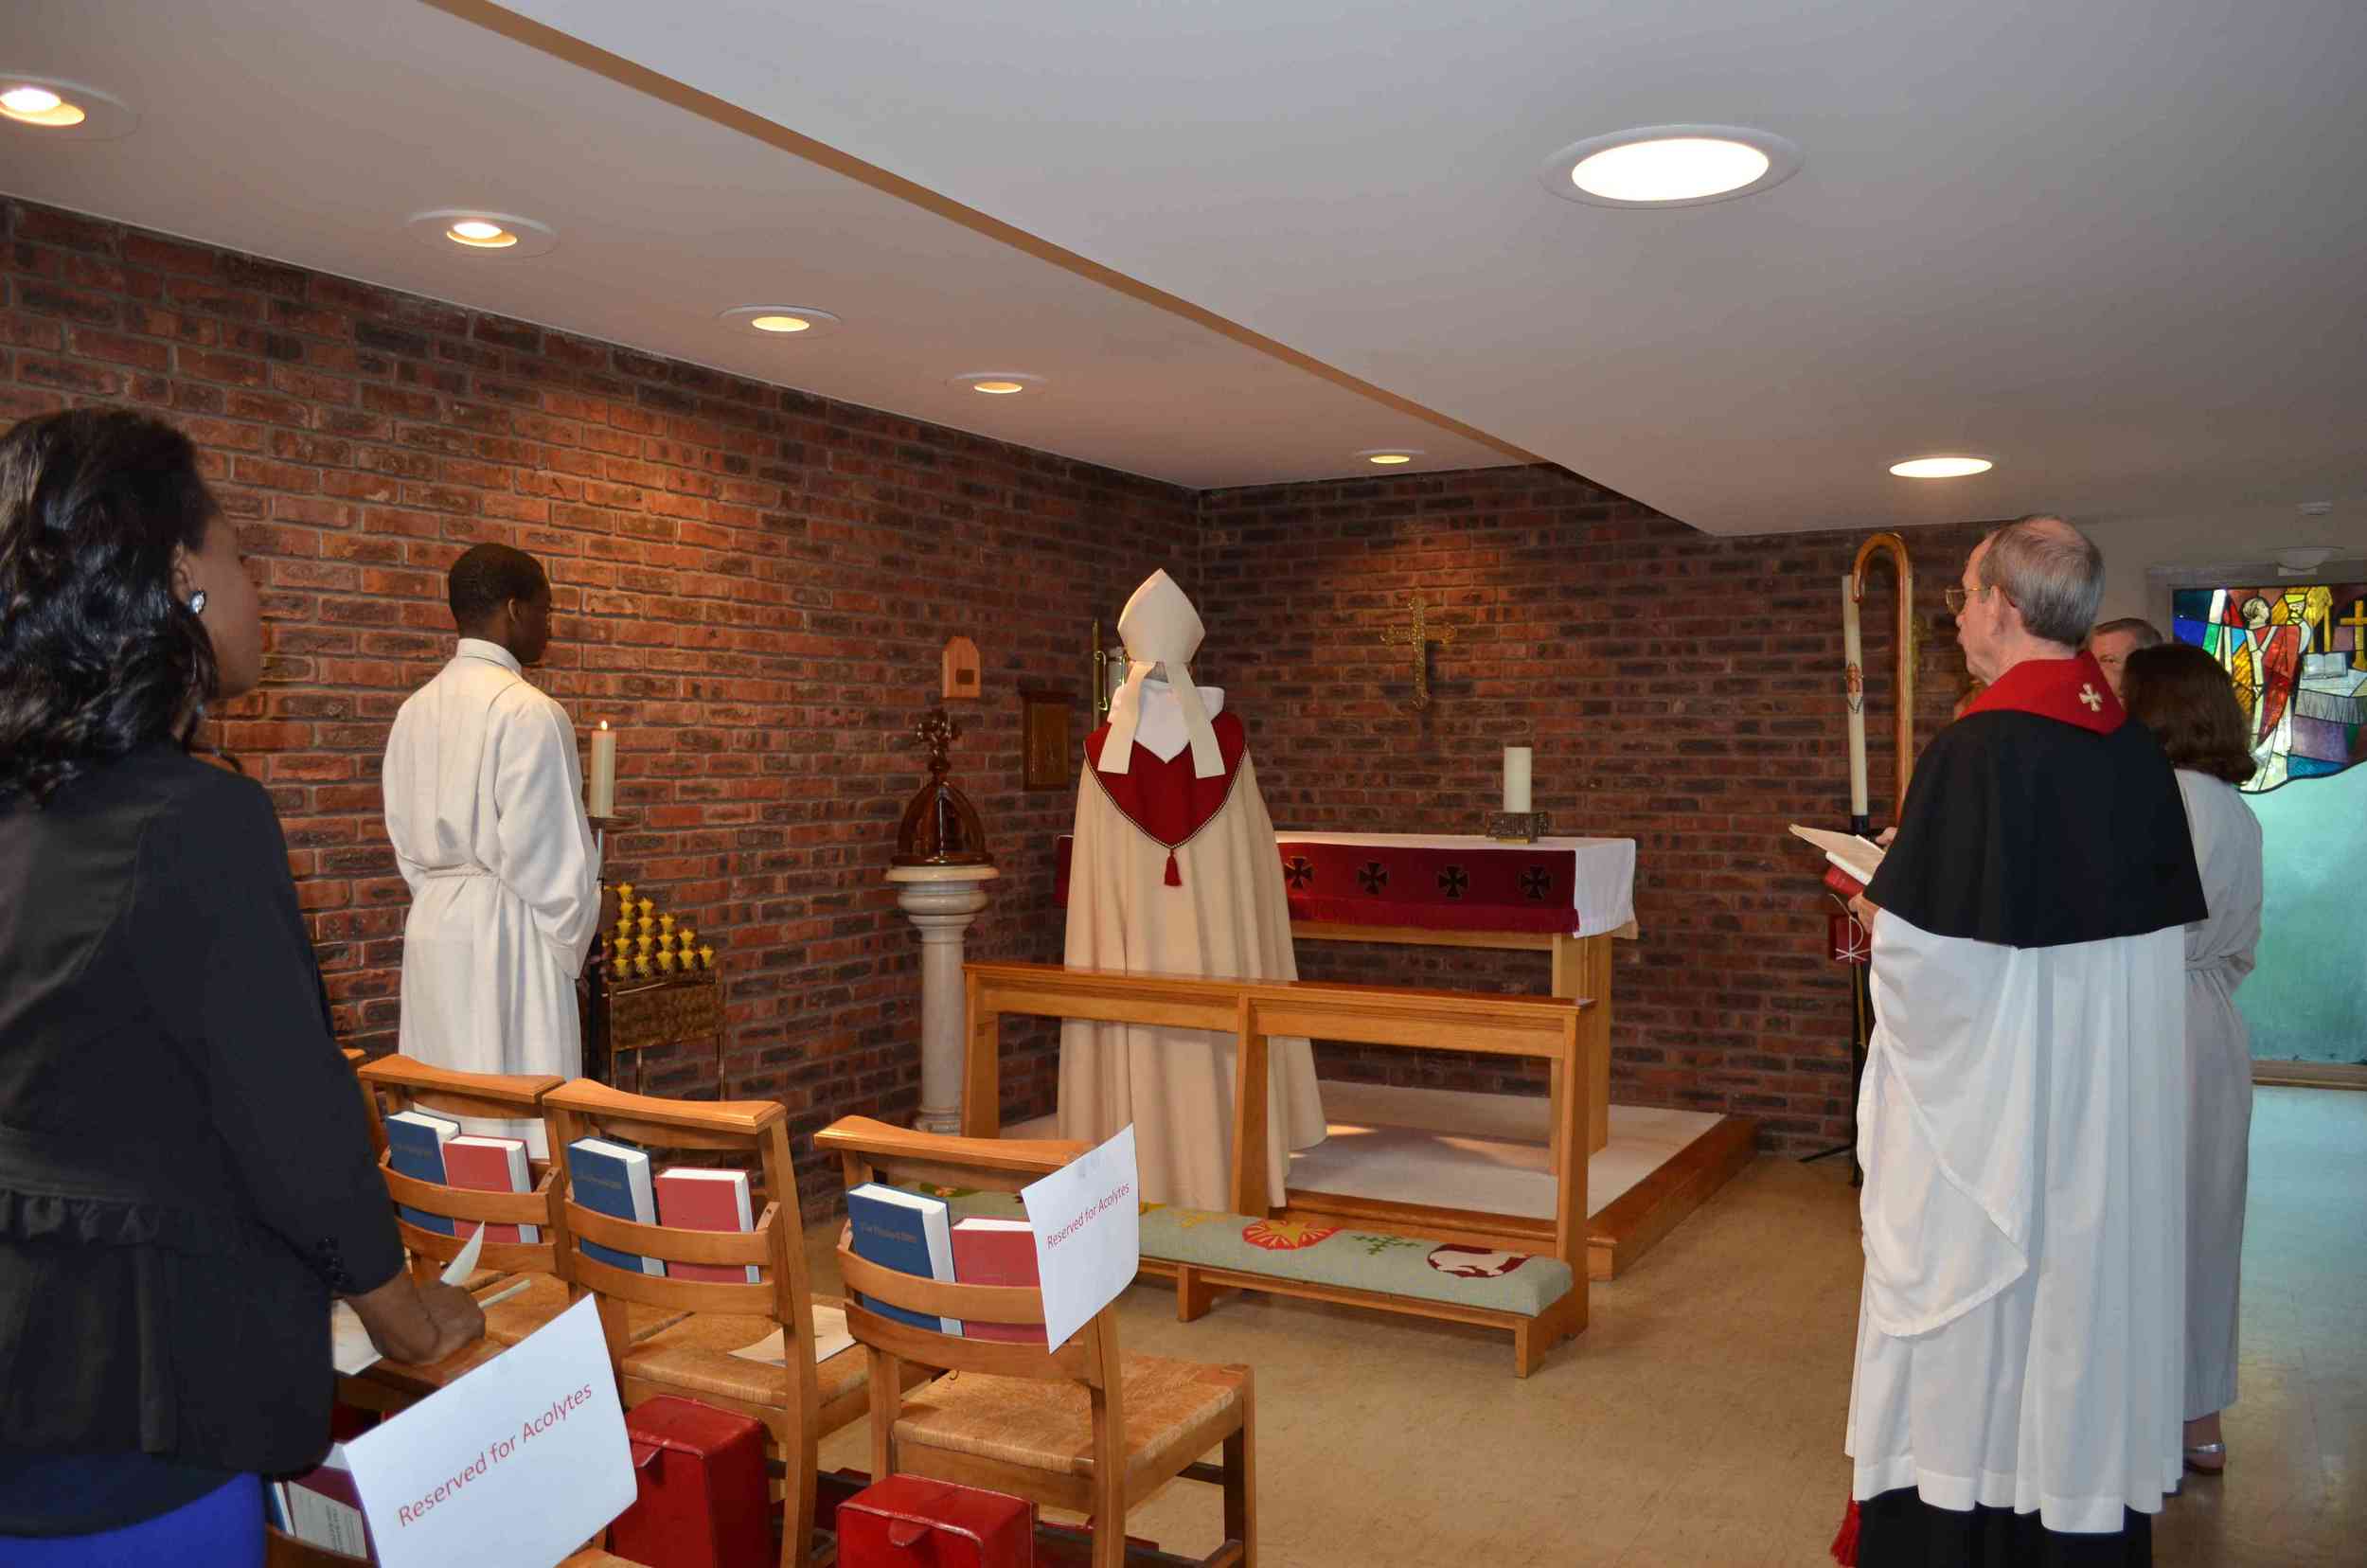  The fair linen for the chapel altar was given in thanksgiving for the Gutterman and Kim children 